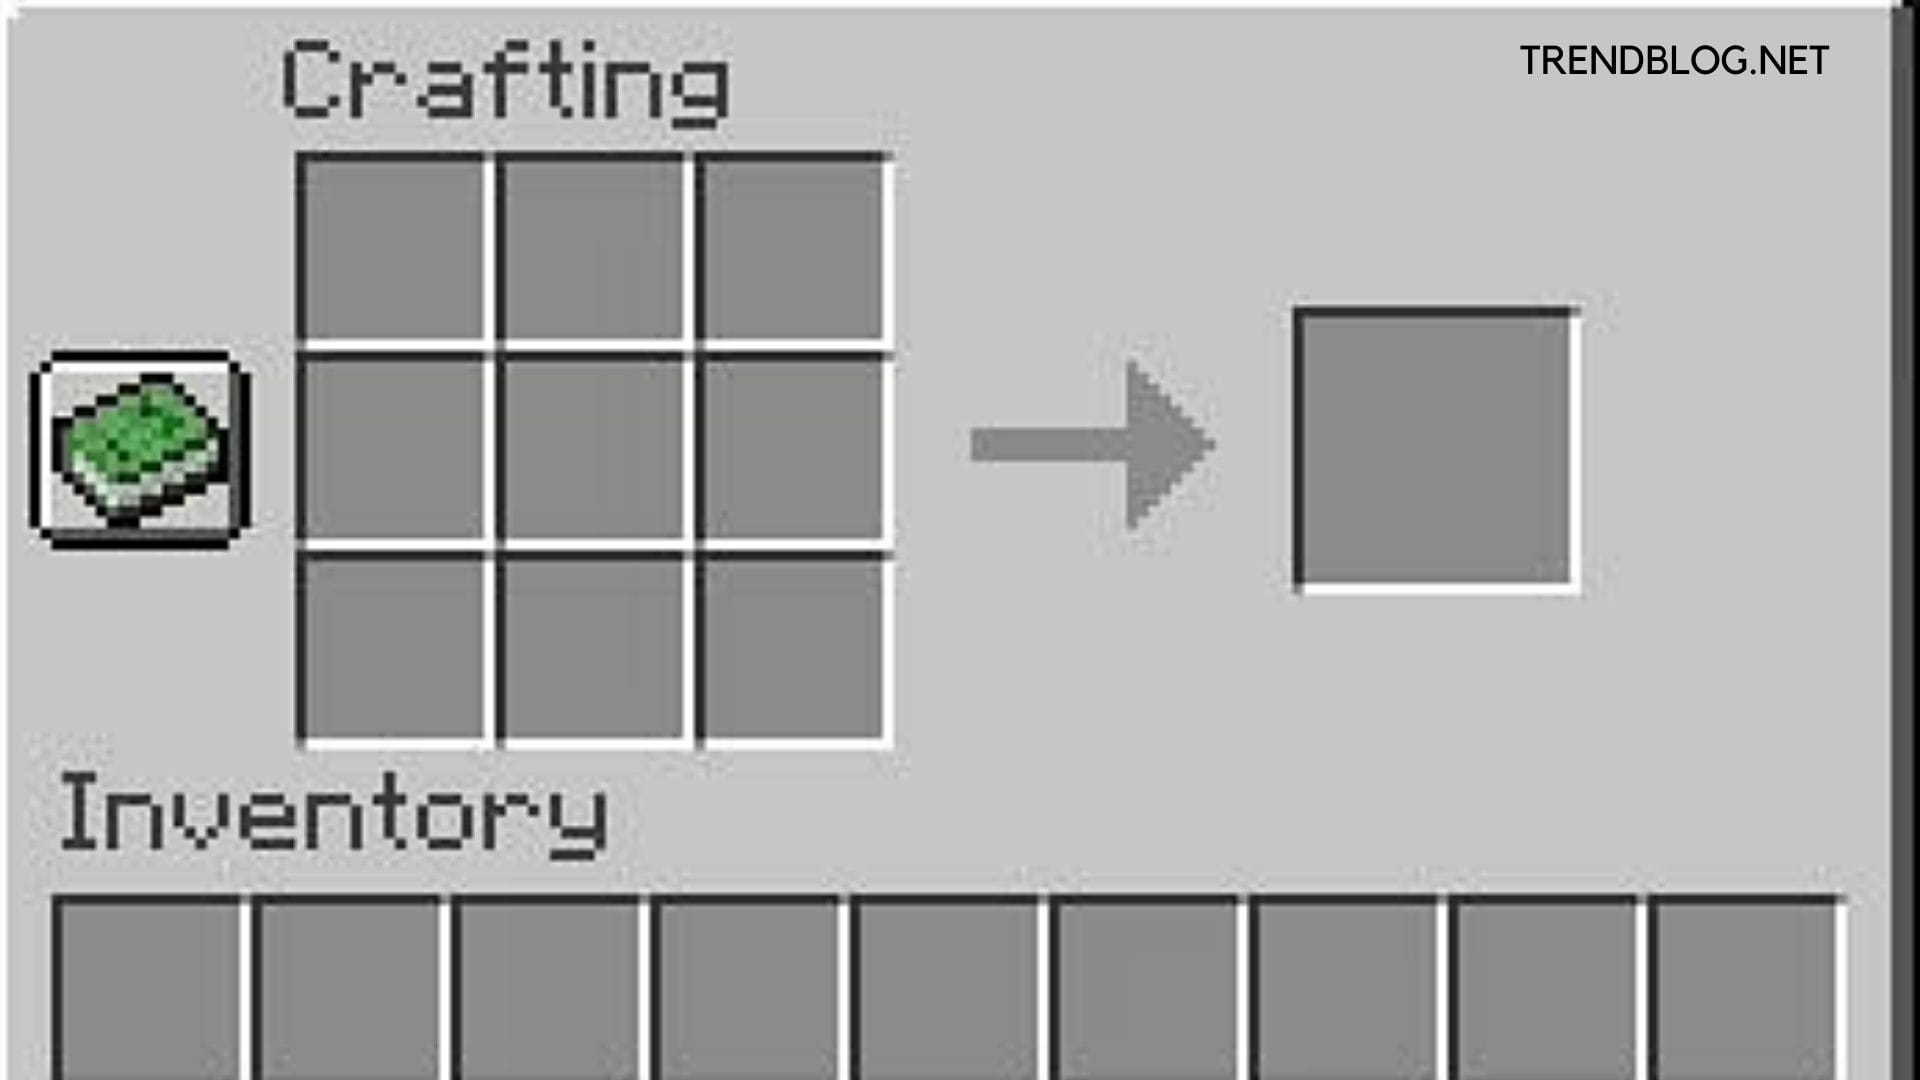 crafting table